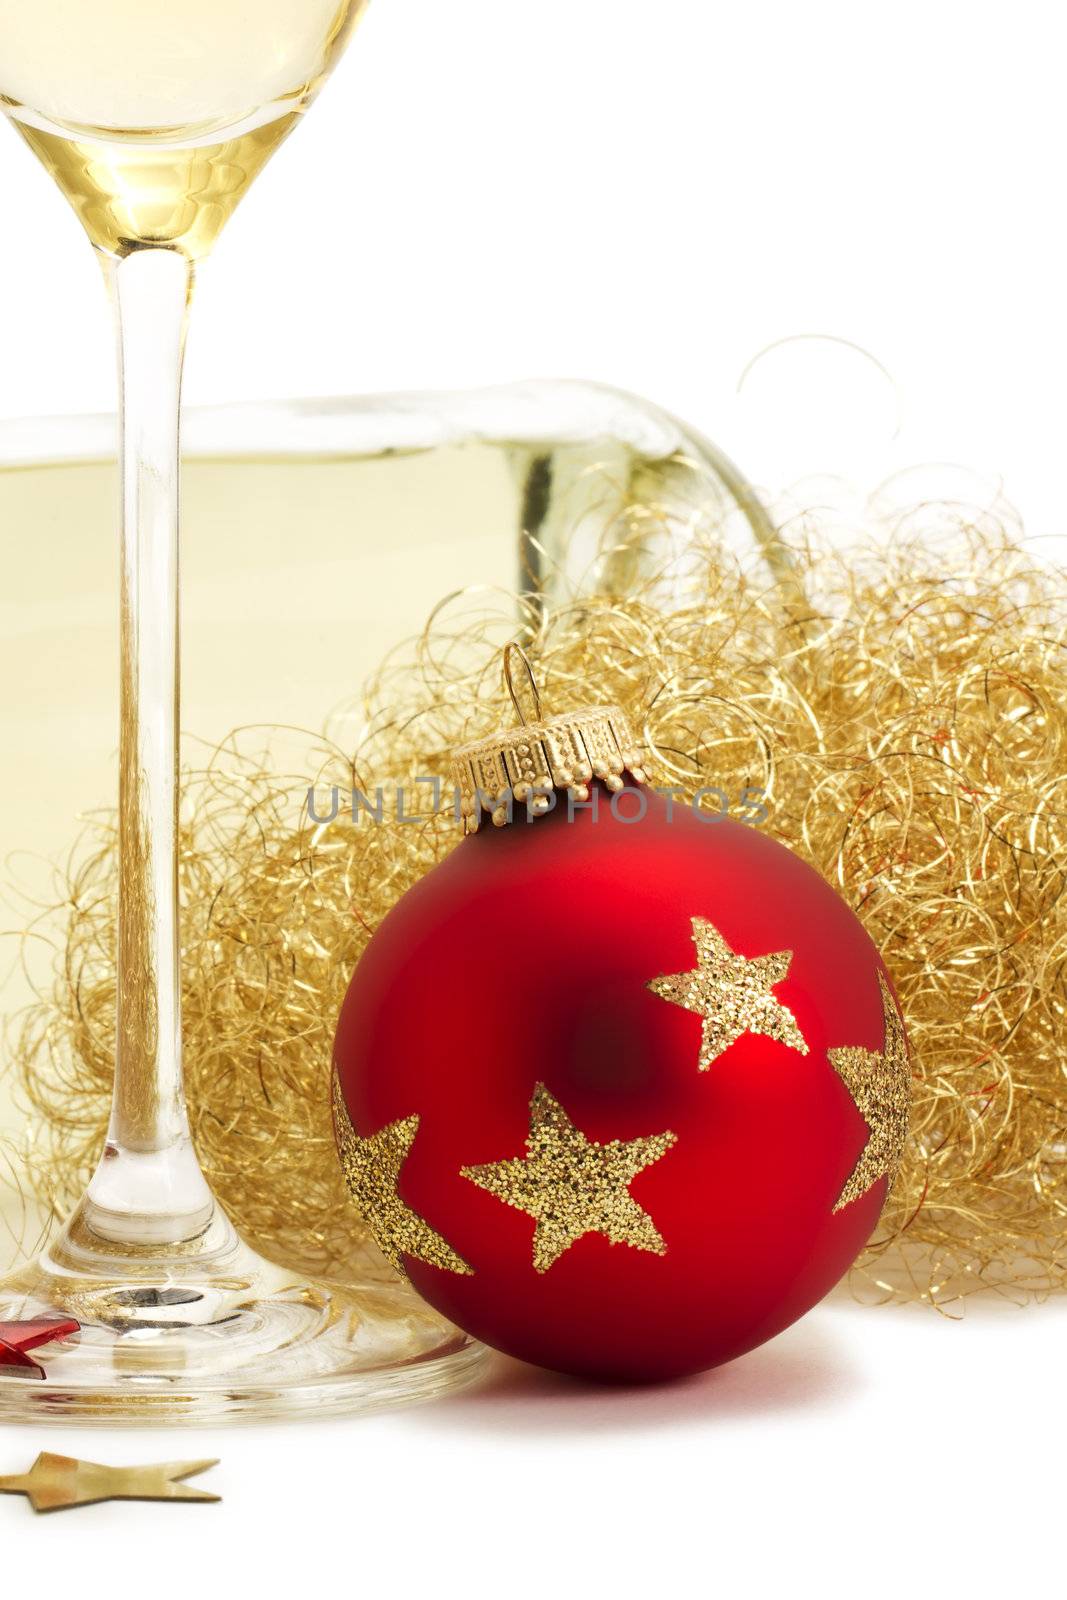 red christmas ball near glass with champagne, angels hair in front of a champagne bottle on white